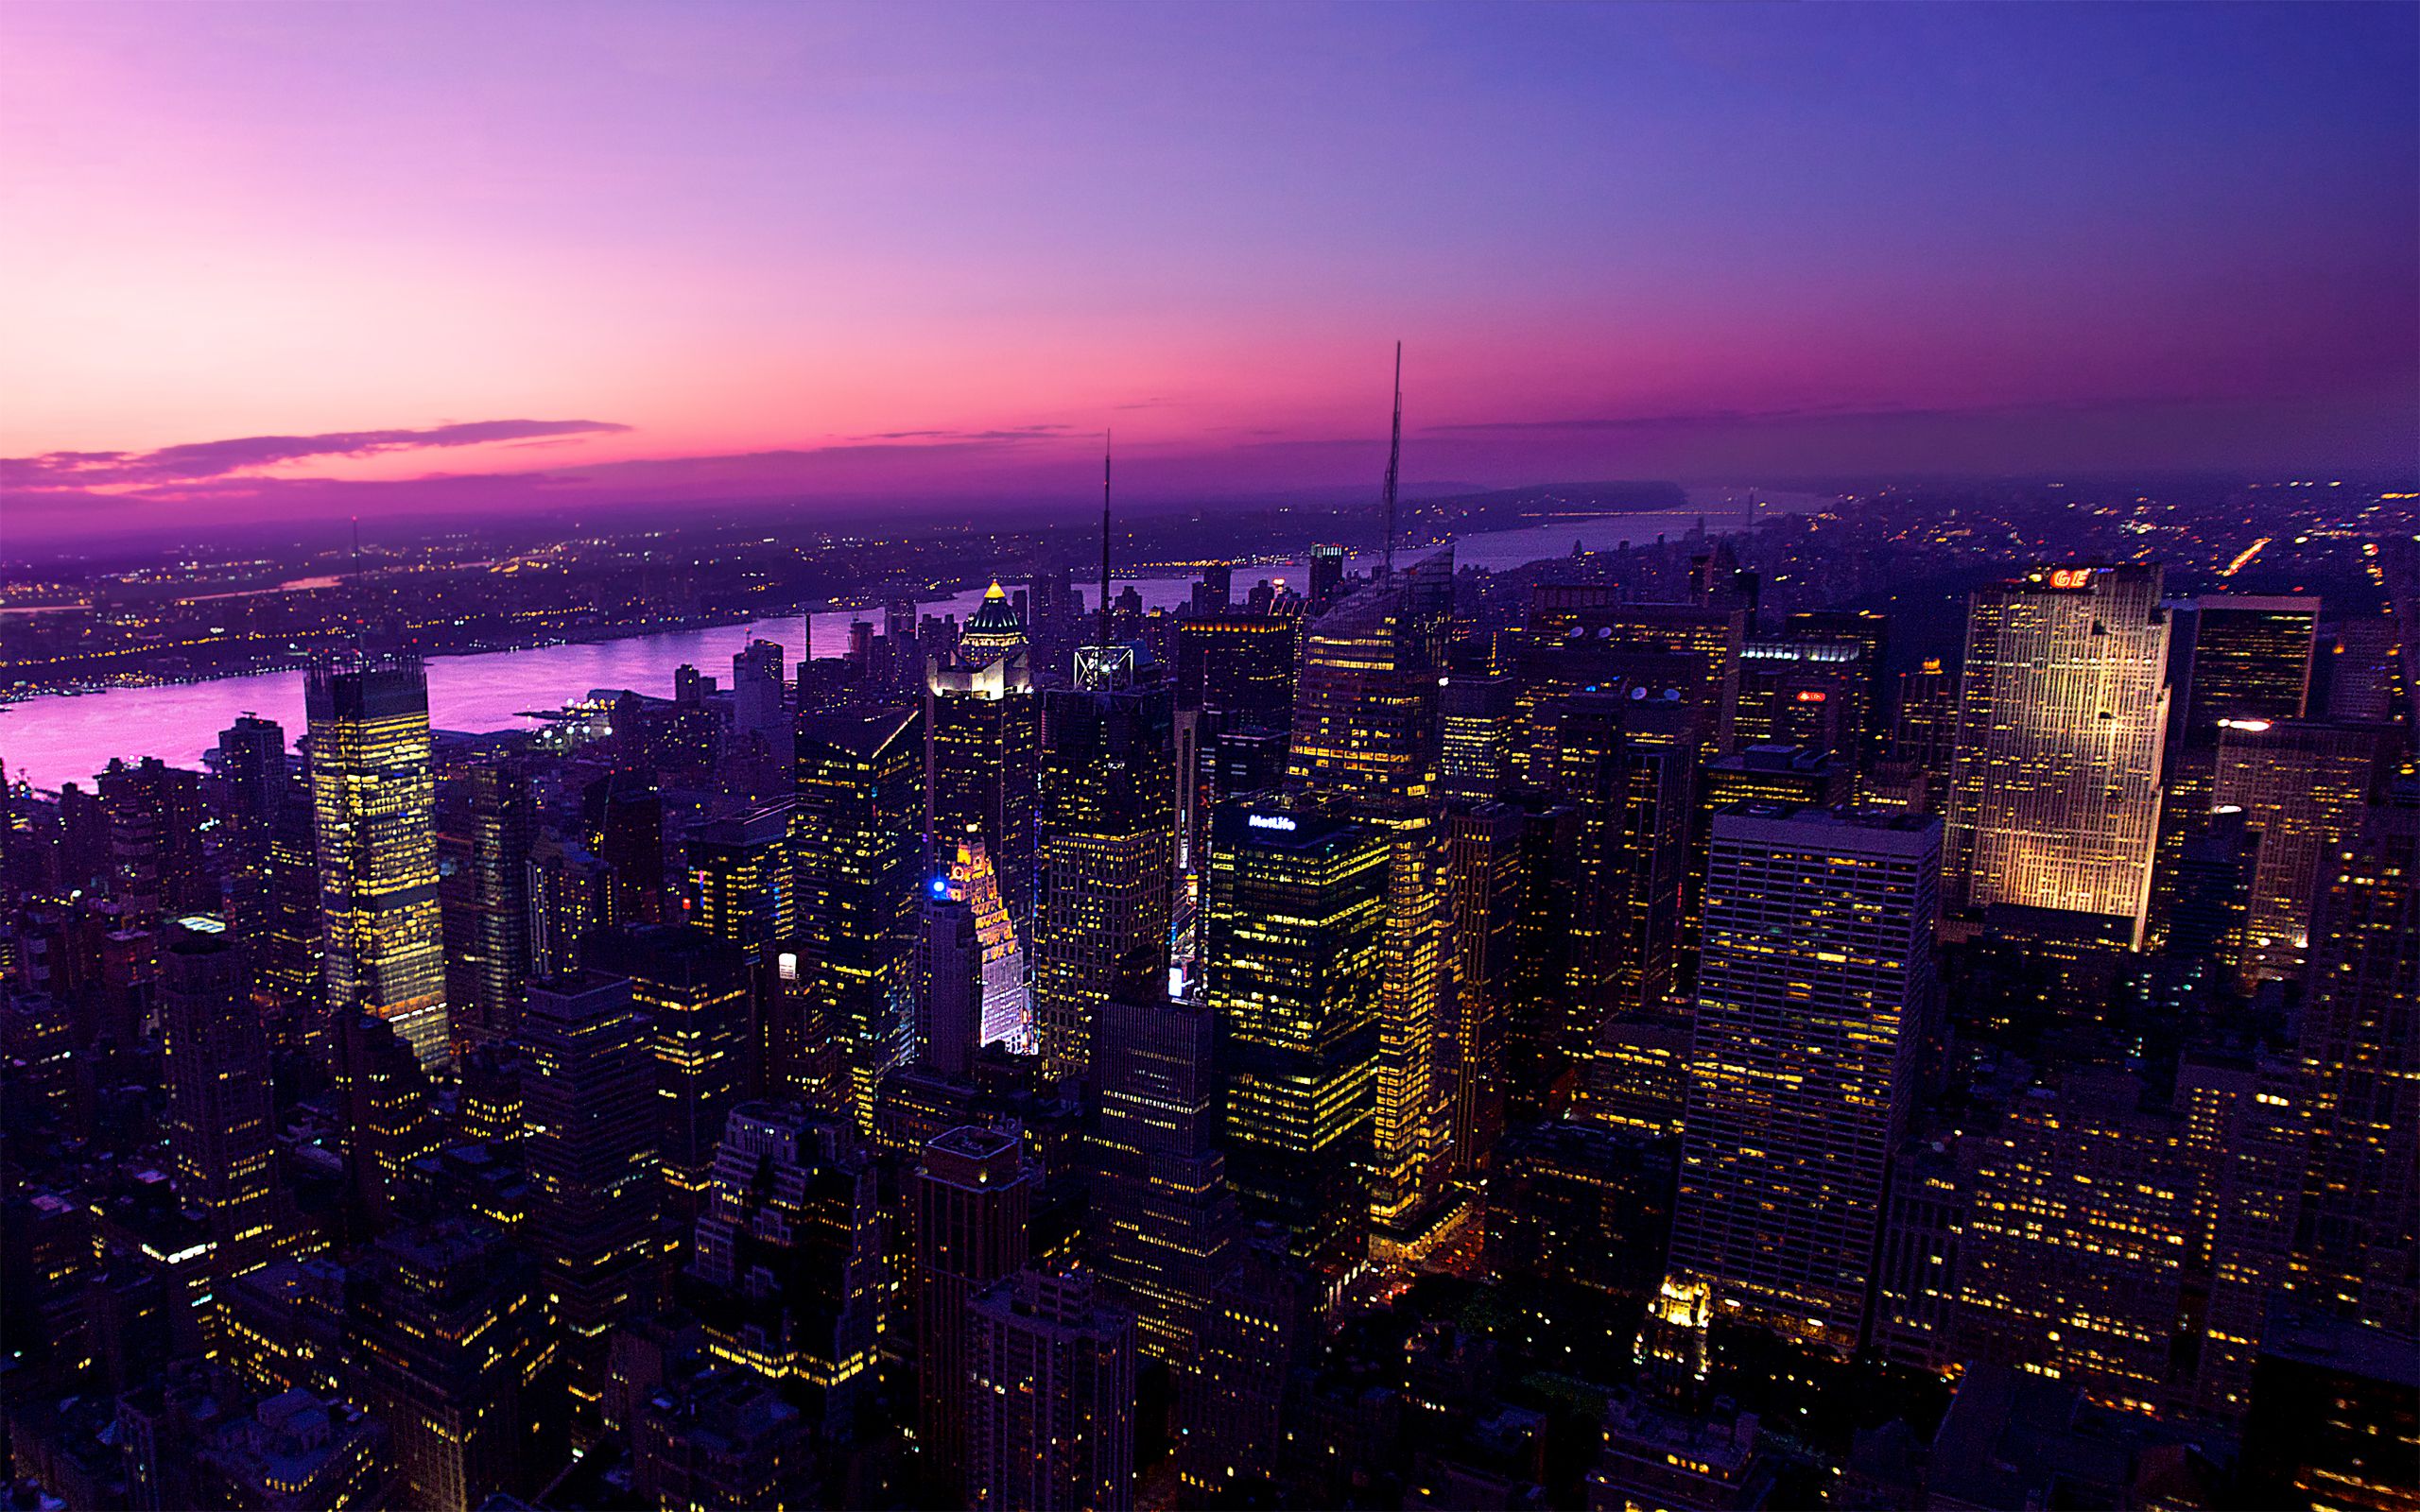 A city skyline at sunset with the water in view - New York, city, 2560x1600